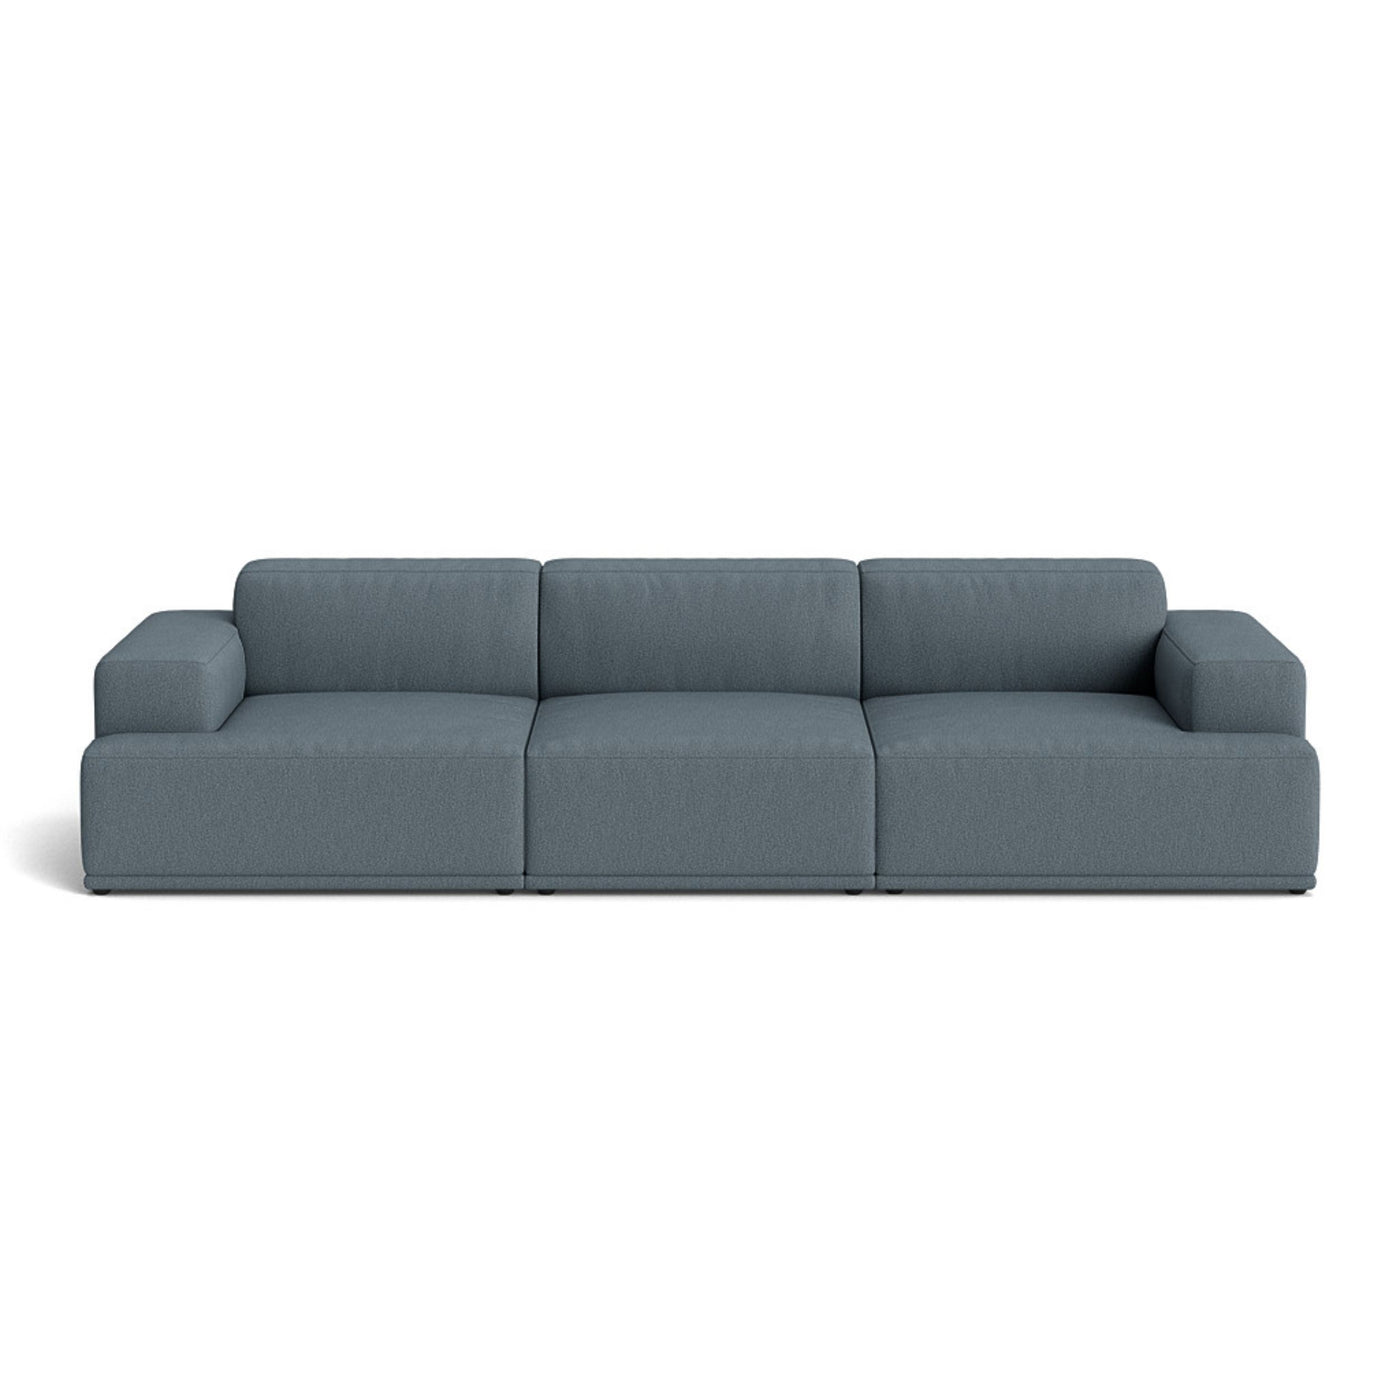 Muuto Connect Soft Modular 3 Seater Sofa, configuration 1. Made-to-order from someday designs. #colour_clay-1-blue